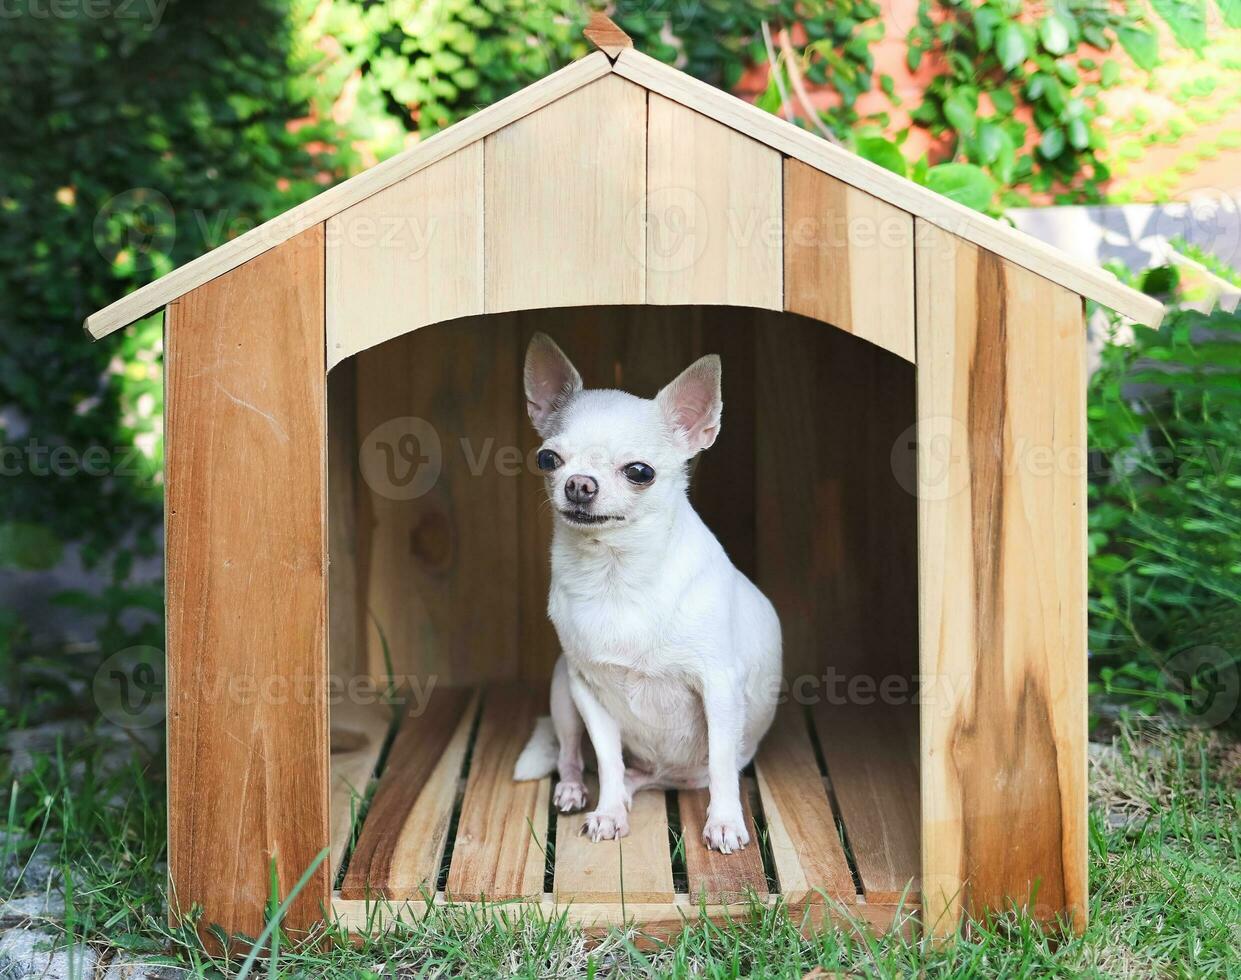 https://static.vecteezy.com/system/resources/previews/026/327/434/non_2x/white-short-hair-chihuahua-dogs-sitting-in-wooden-dog-house-smiling-and-looking-at-camera-photo.jpg